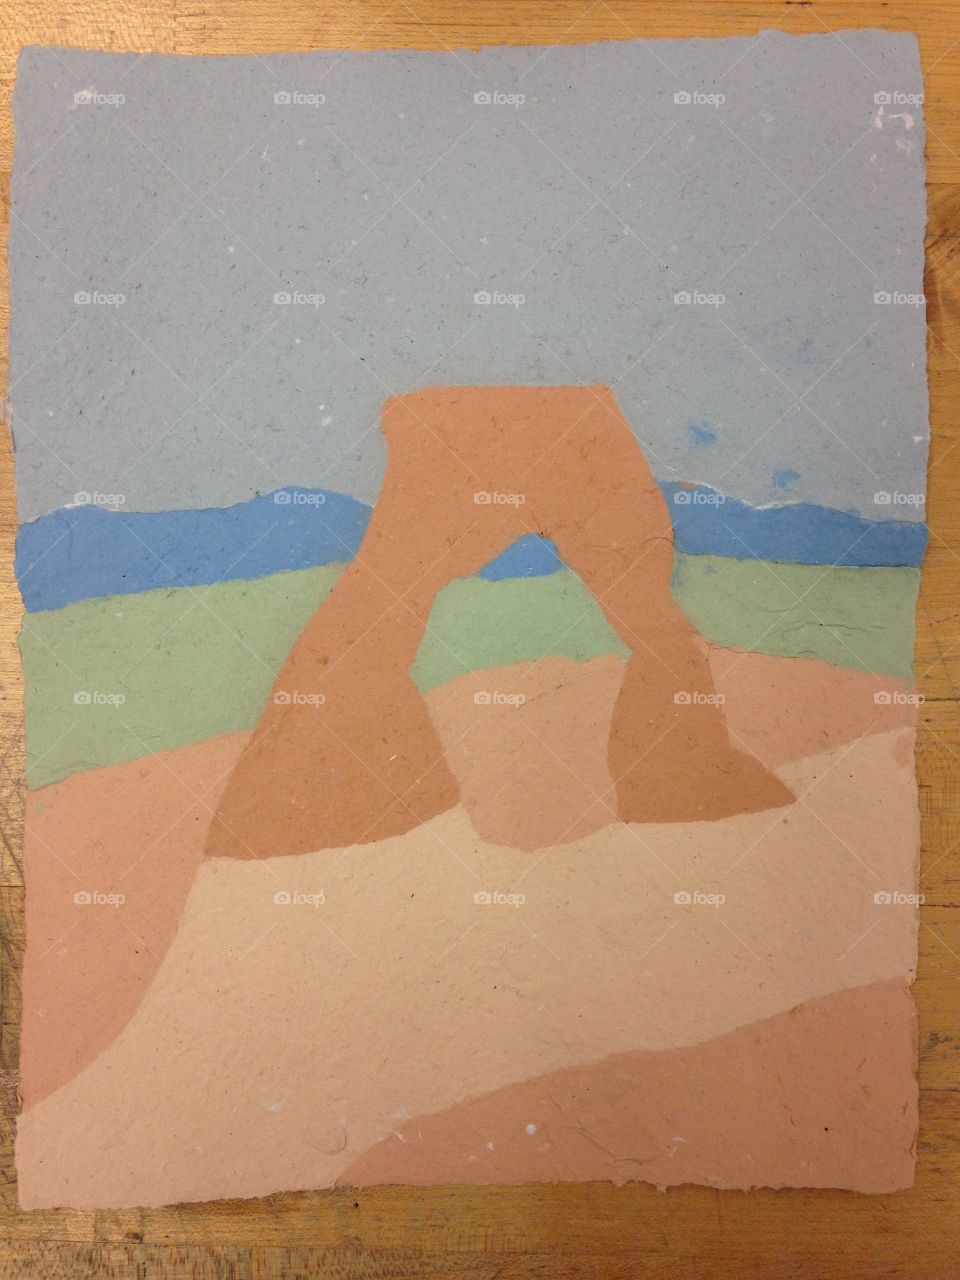 Creative and colorful paper making art of arches national park